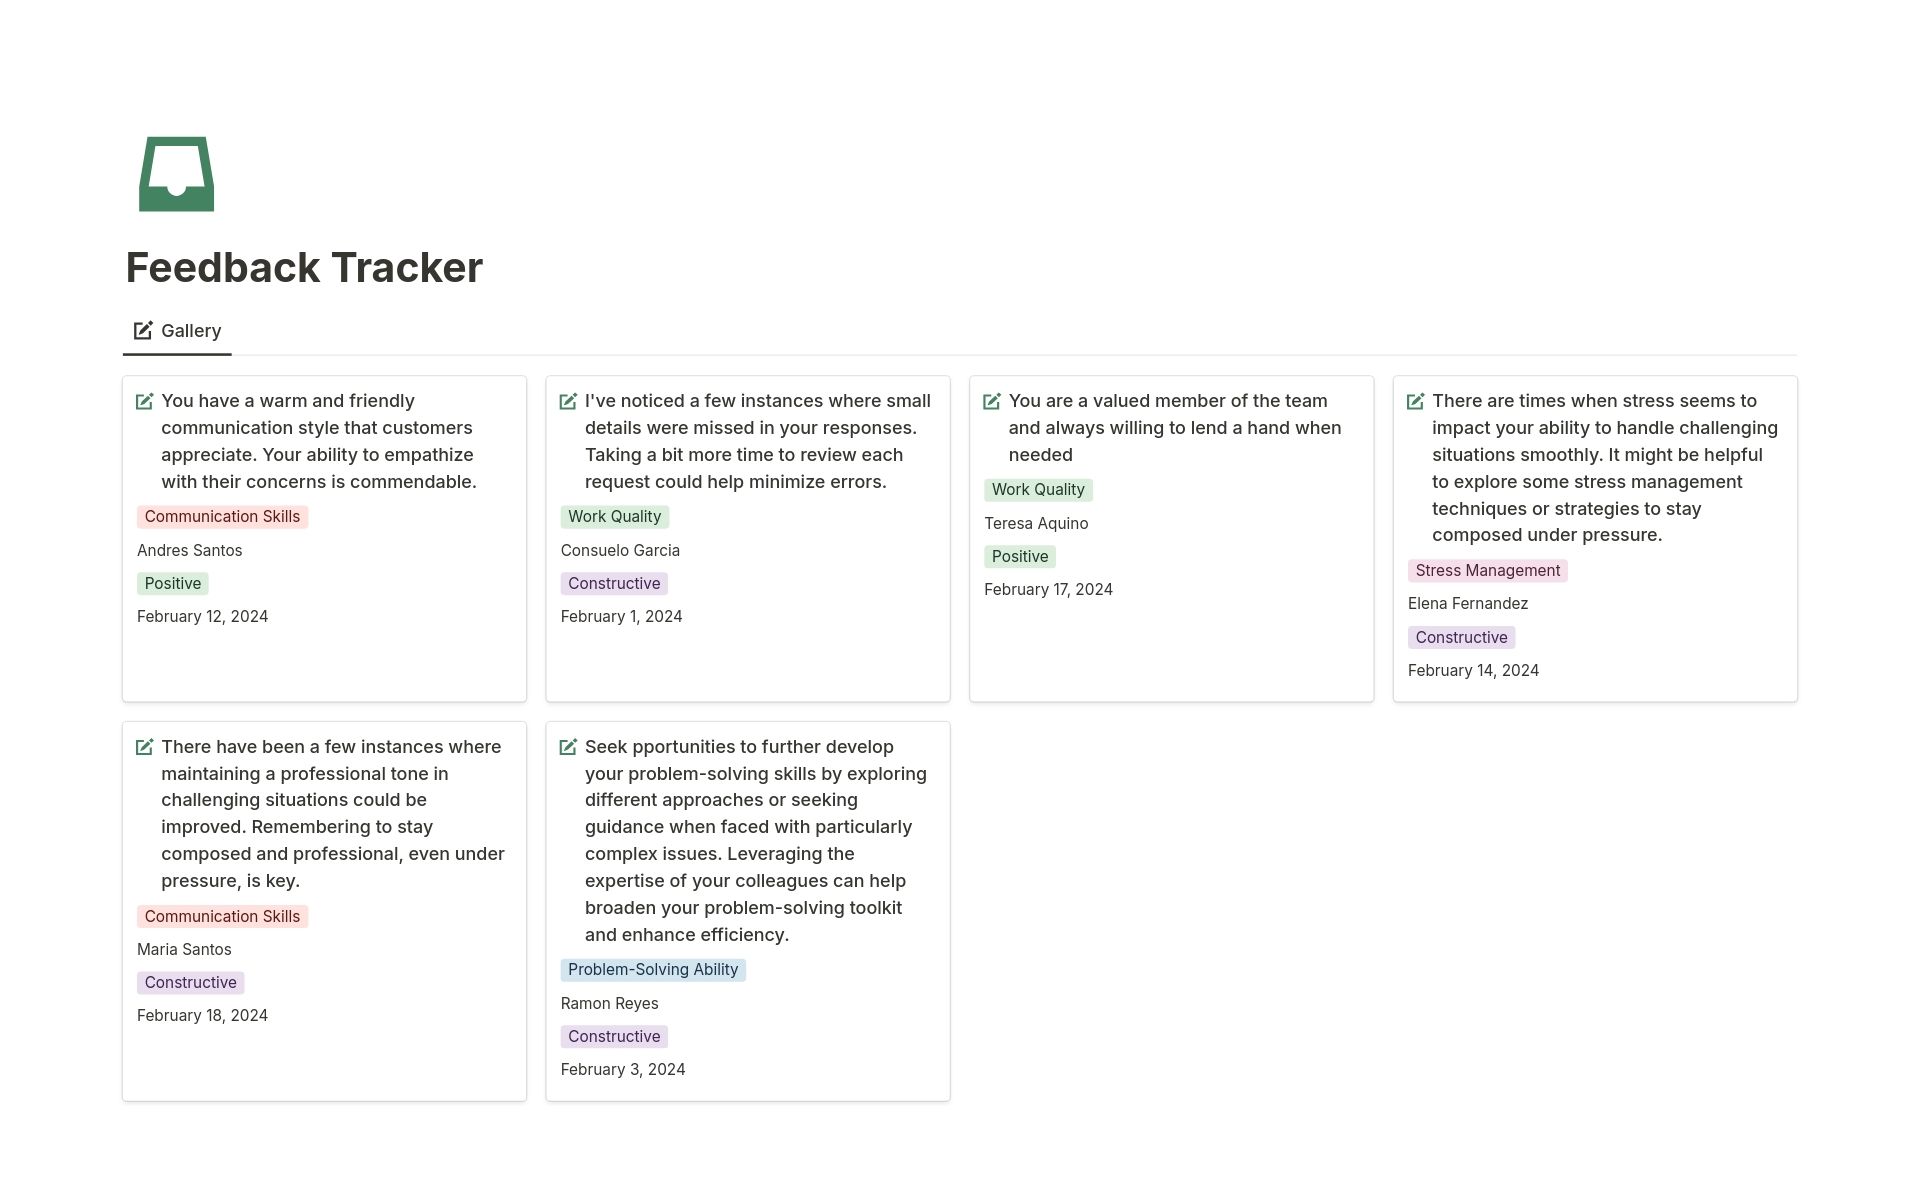 This is a personal feedback tracker is a tool designed to collect, organize, and manage feedback provided